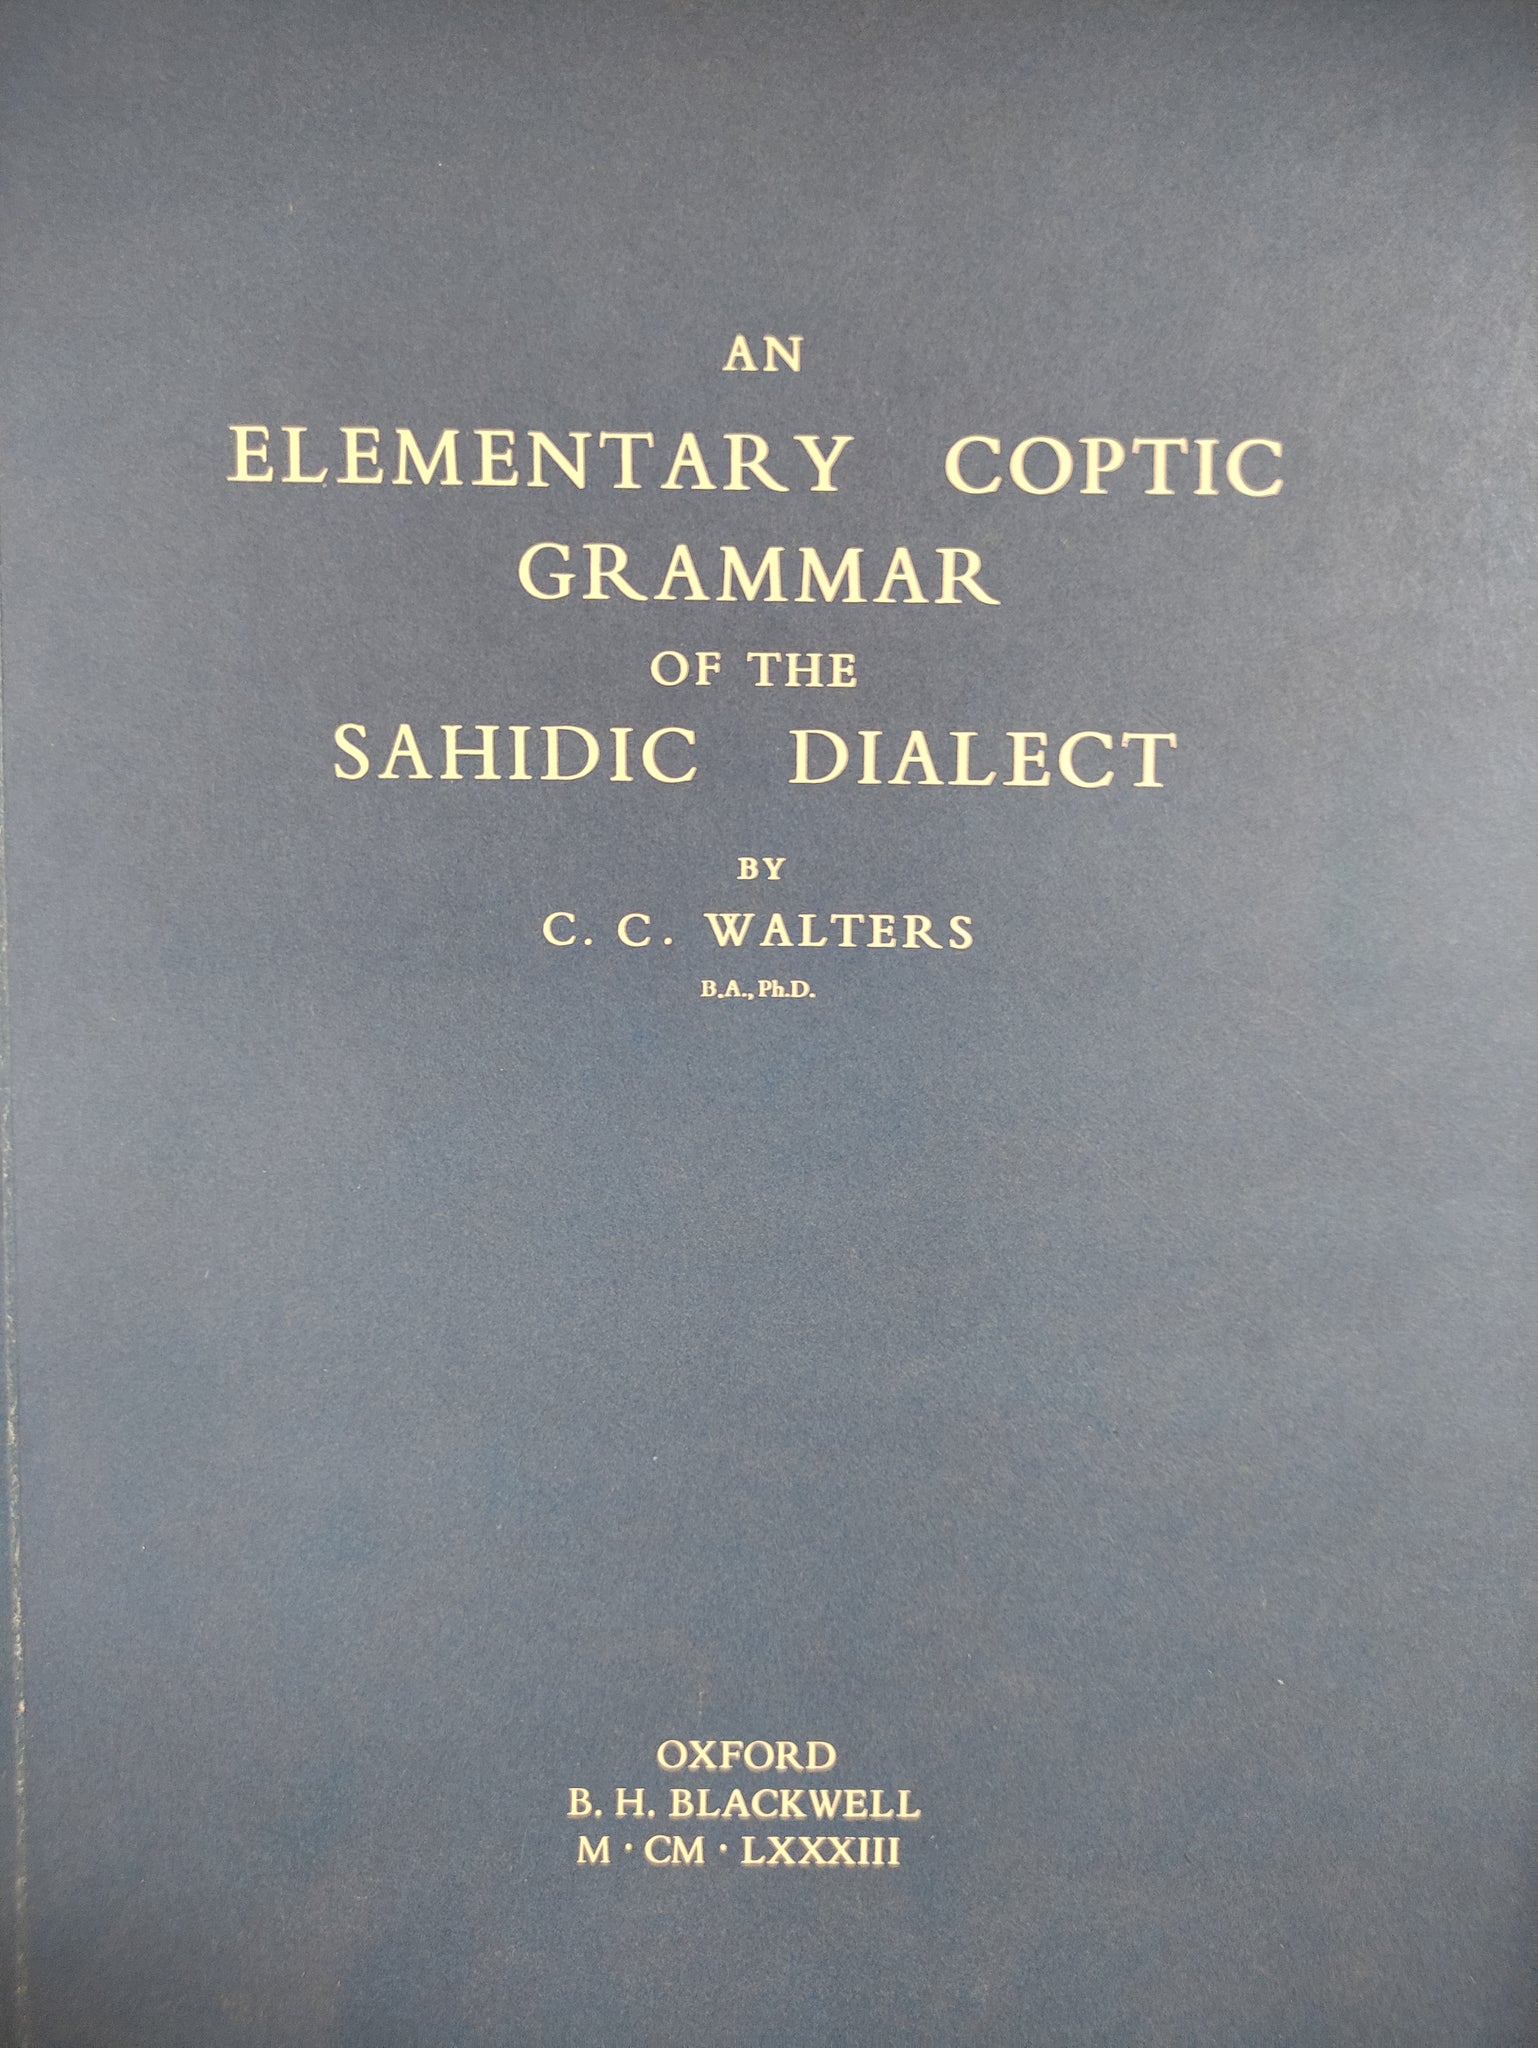 An elementary coptic grammar of the sahidic dialect.